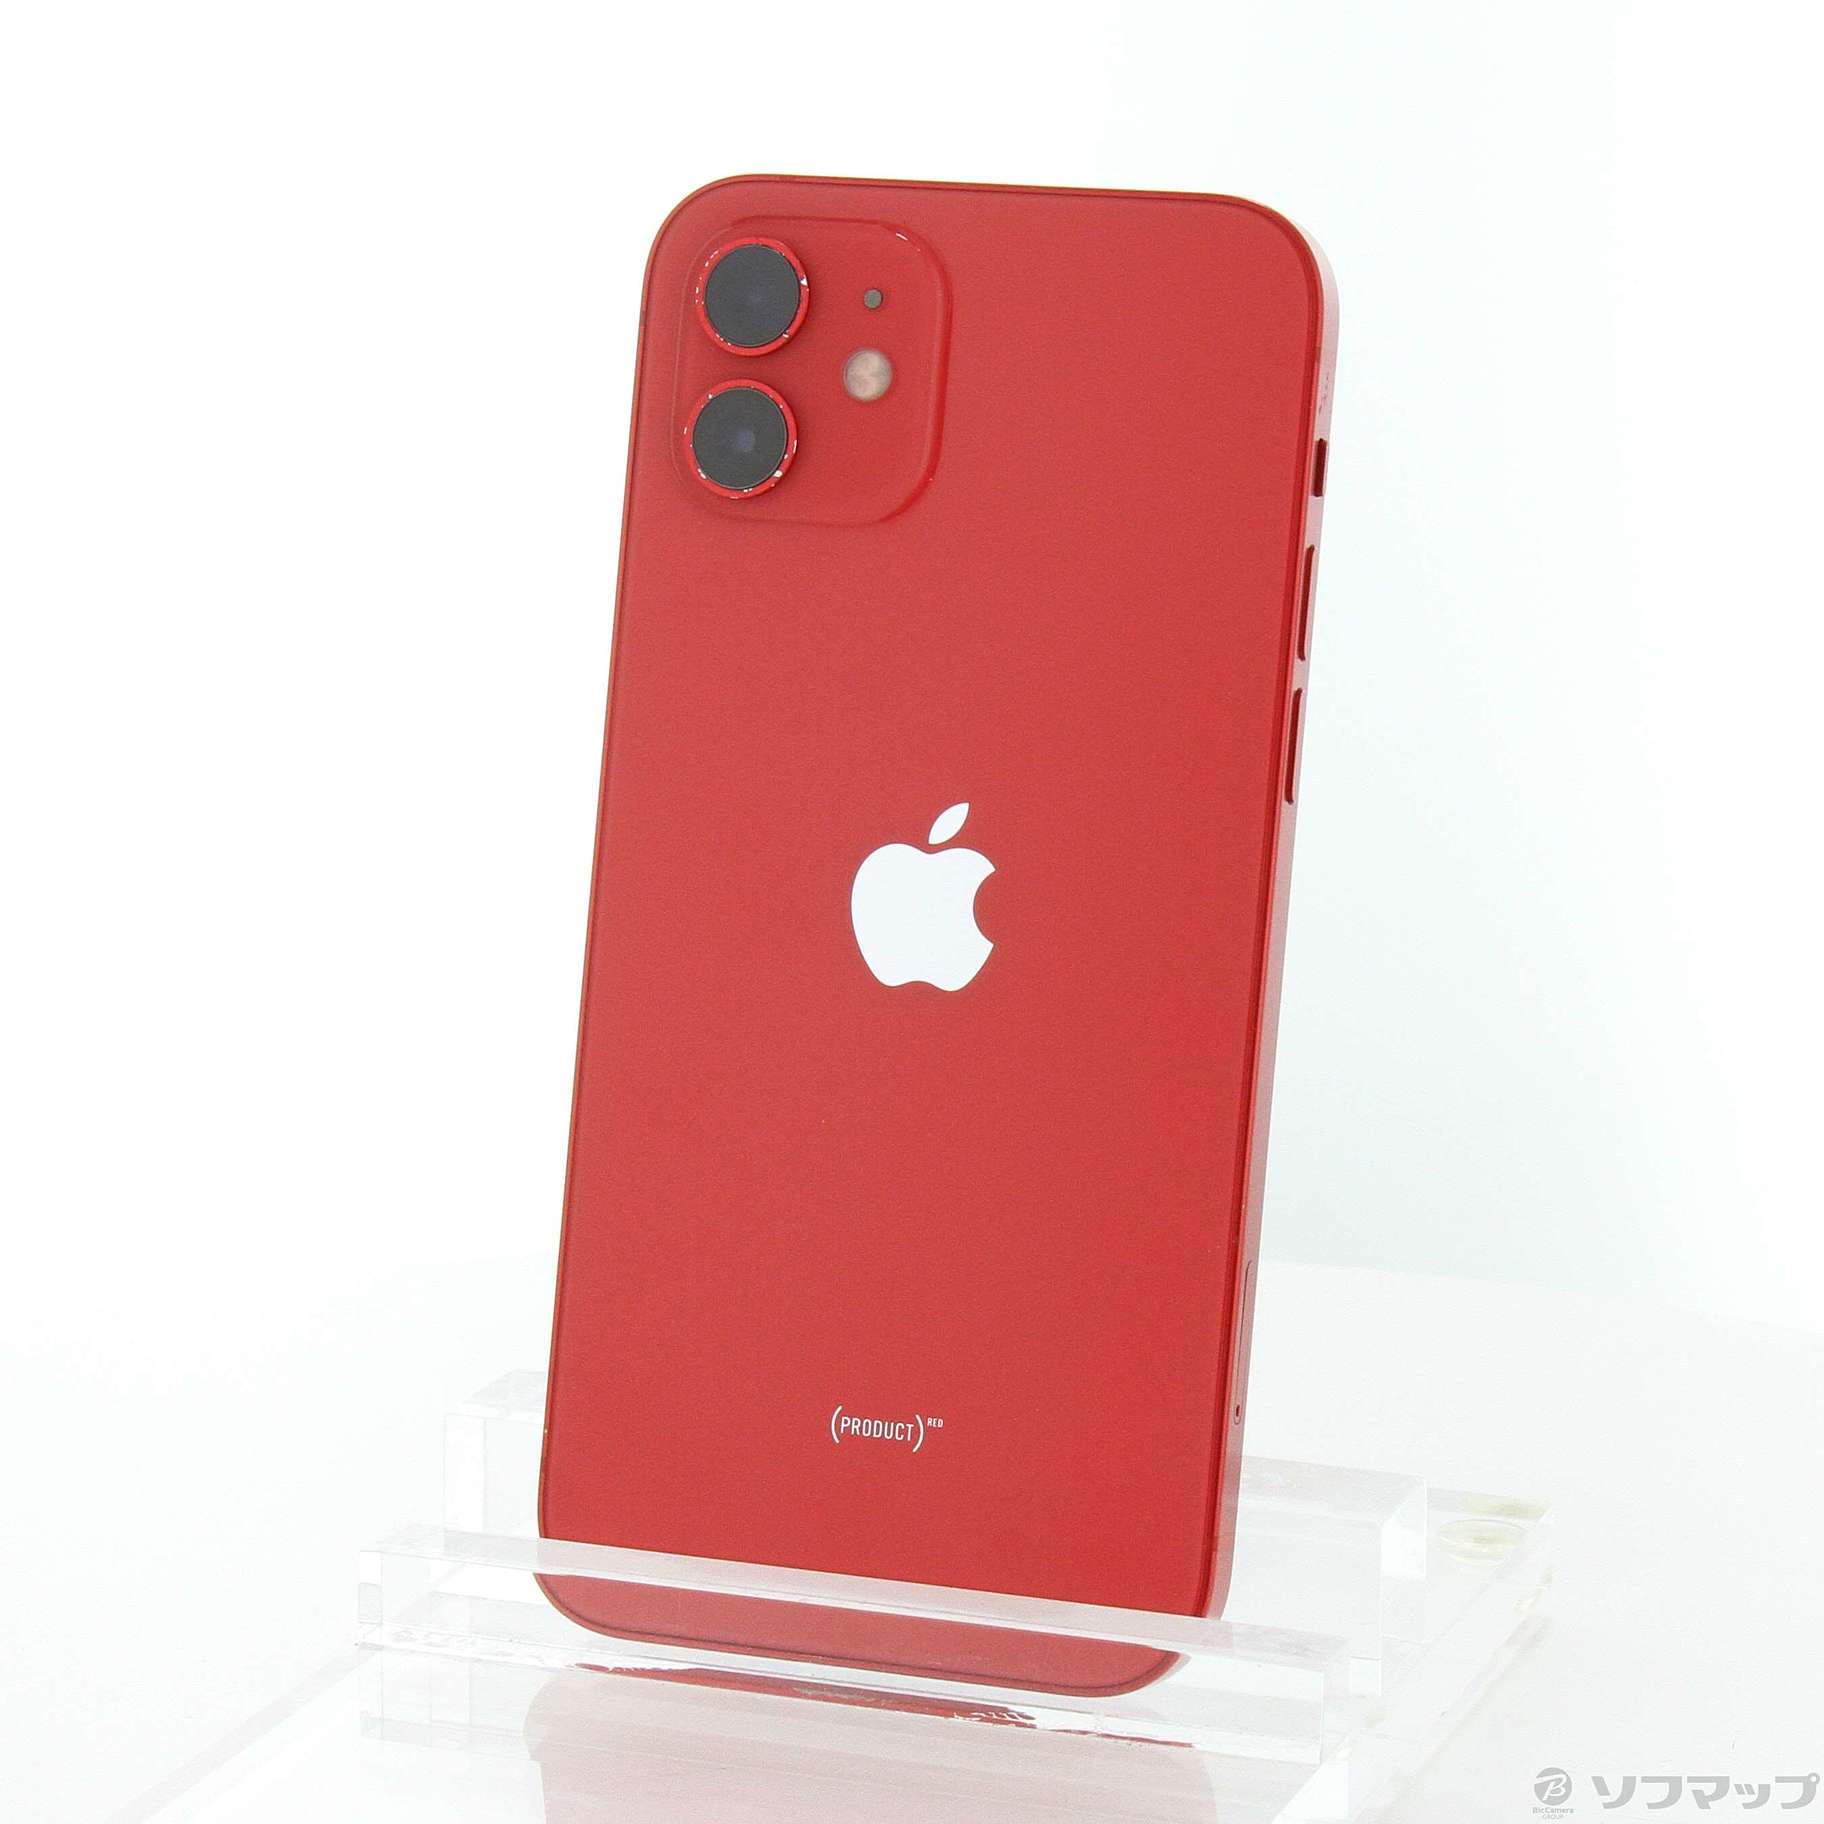 iPhone12 （PRODUCT）RED 64GB 美品